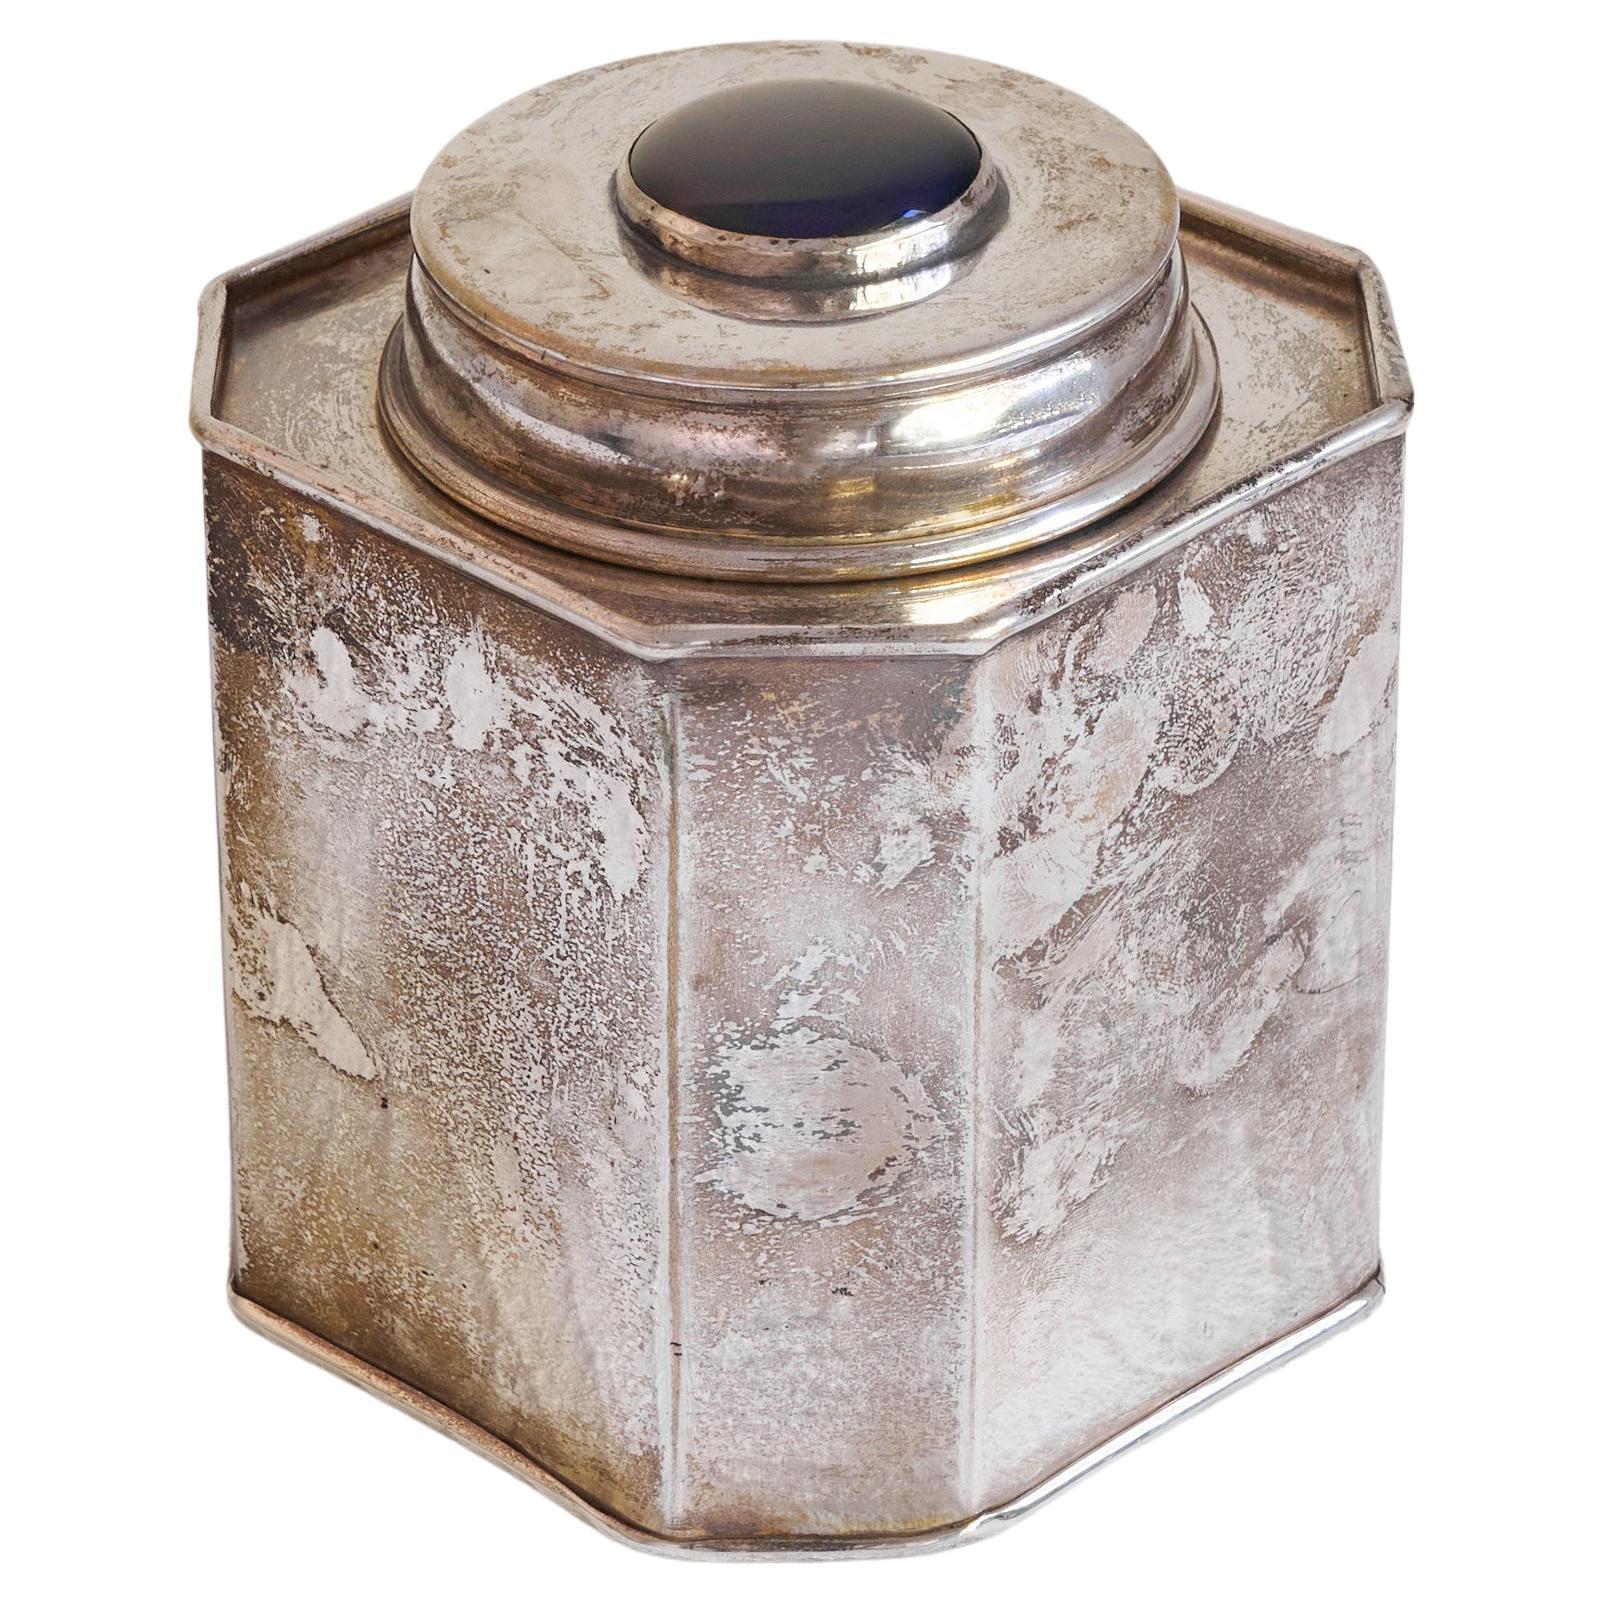 Antique Silver Plated Octagonal Tea Caddy with Lapis Lazuli Colored Detail